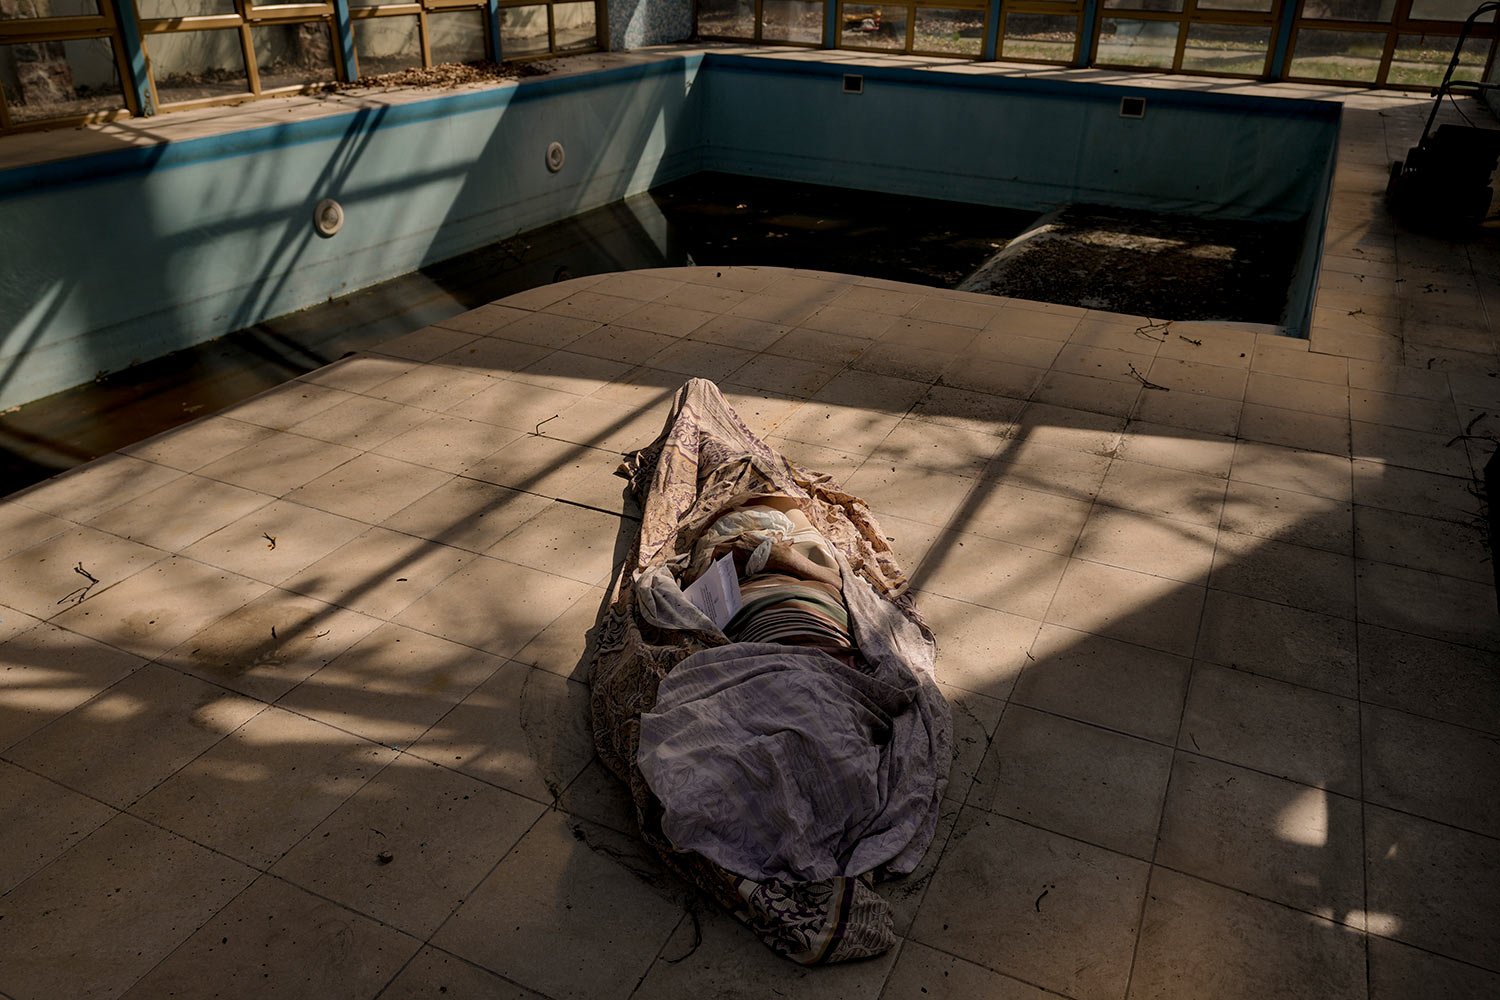  A body lies by the swimming pool of a home for the elderly in Bucha, Ukraine, Thursday, April 7, 2022. (AP Photo/Vadim Ghirda) 